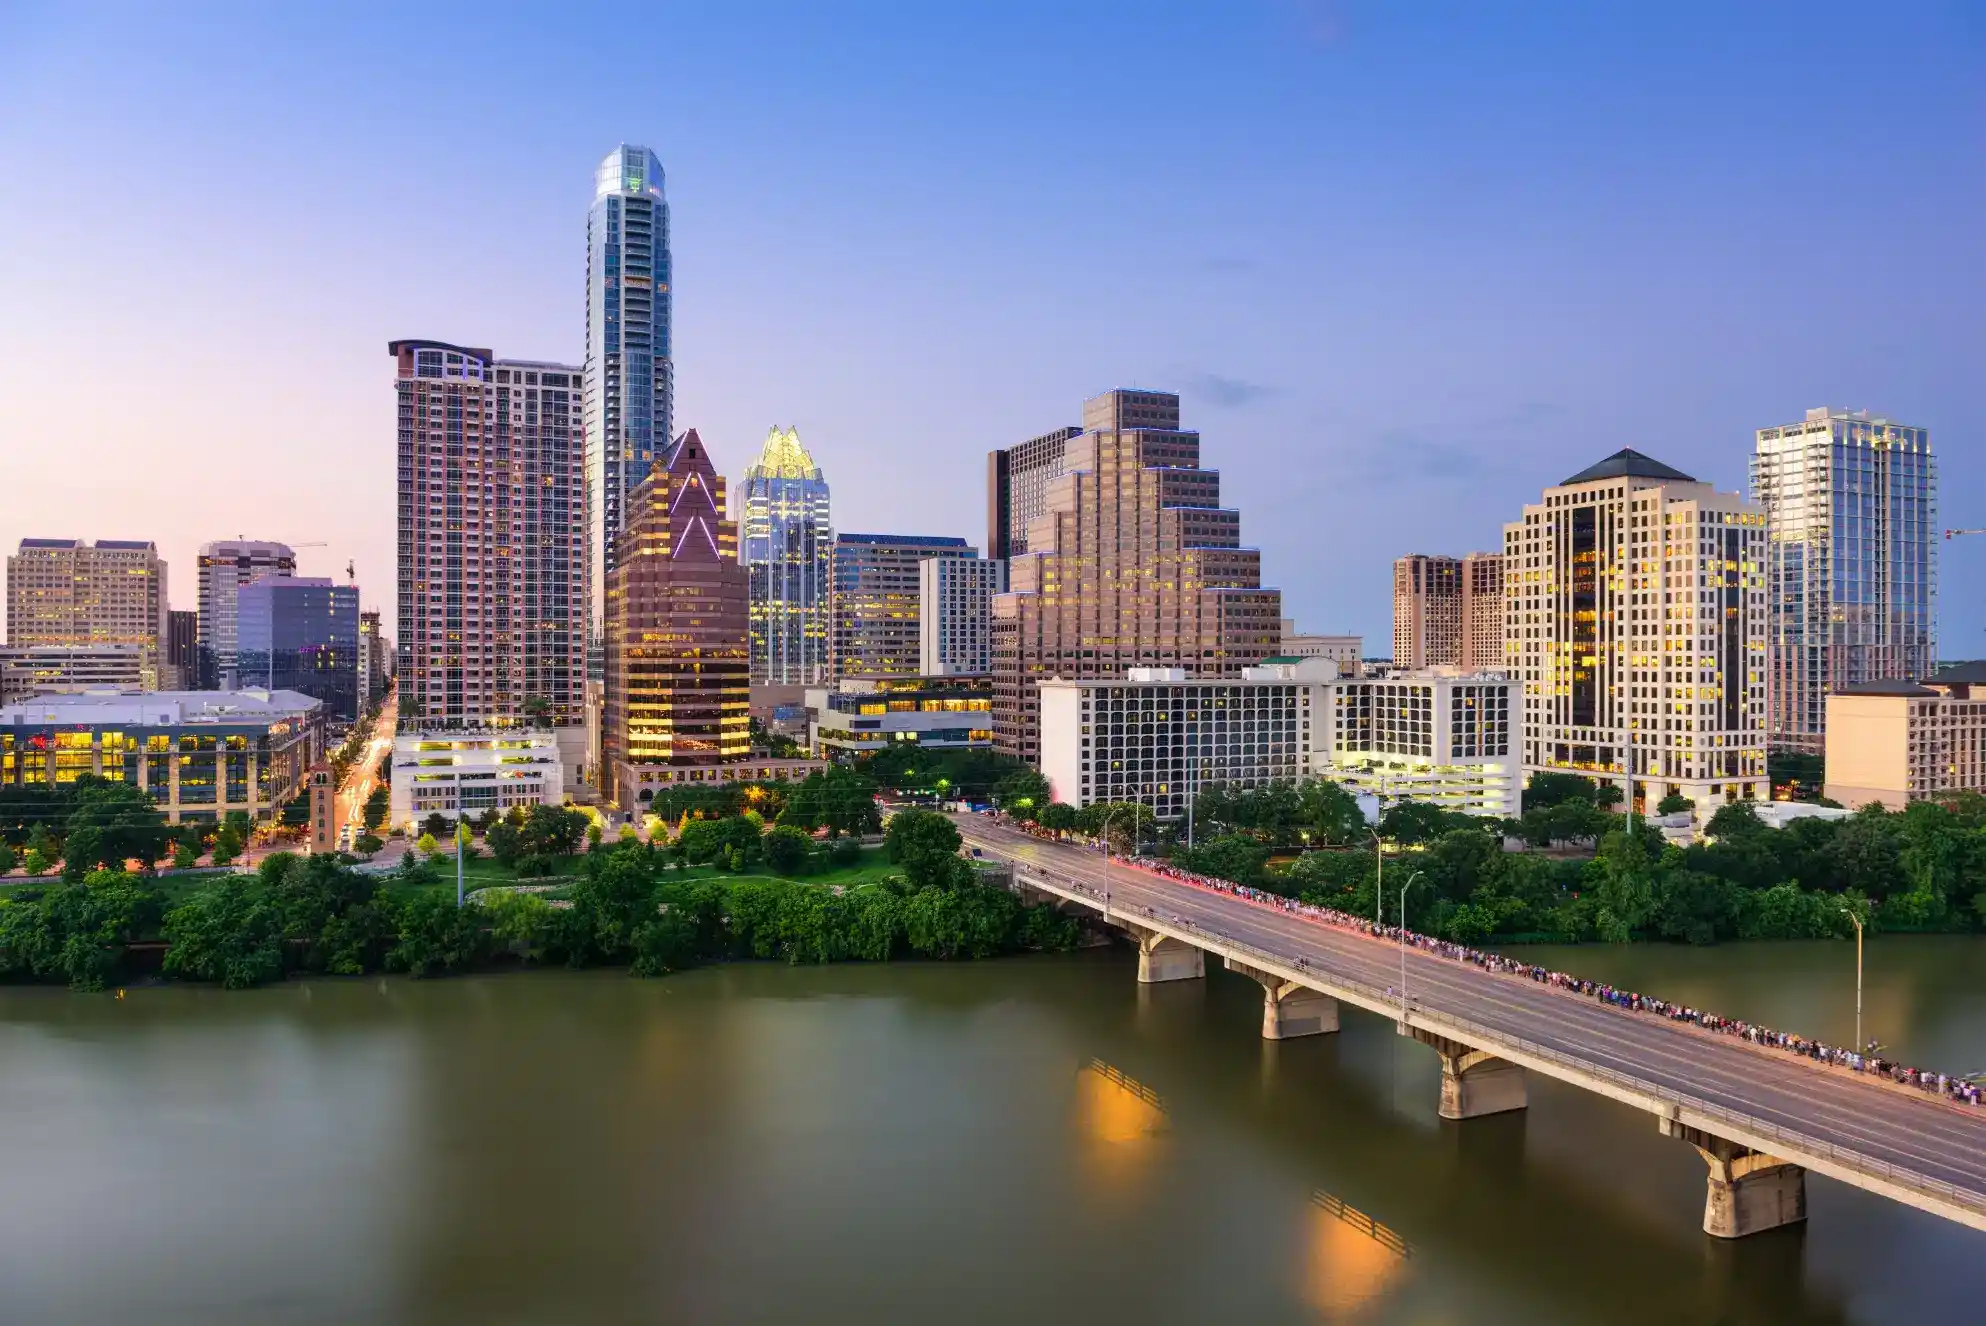 Downtown Austin at dusk – Fortitude Advisors is an investment bank with a location in Austin, TX.